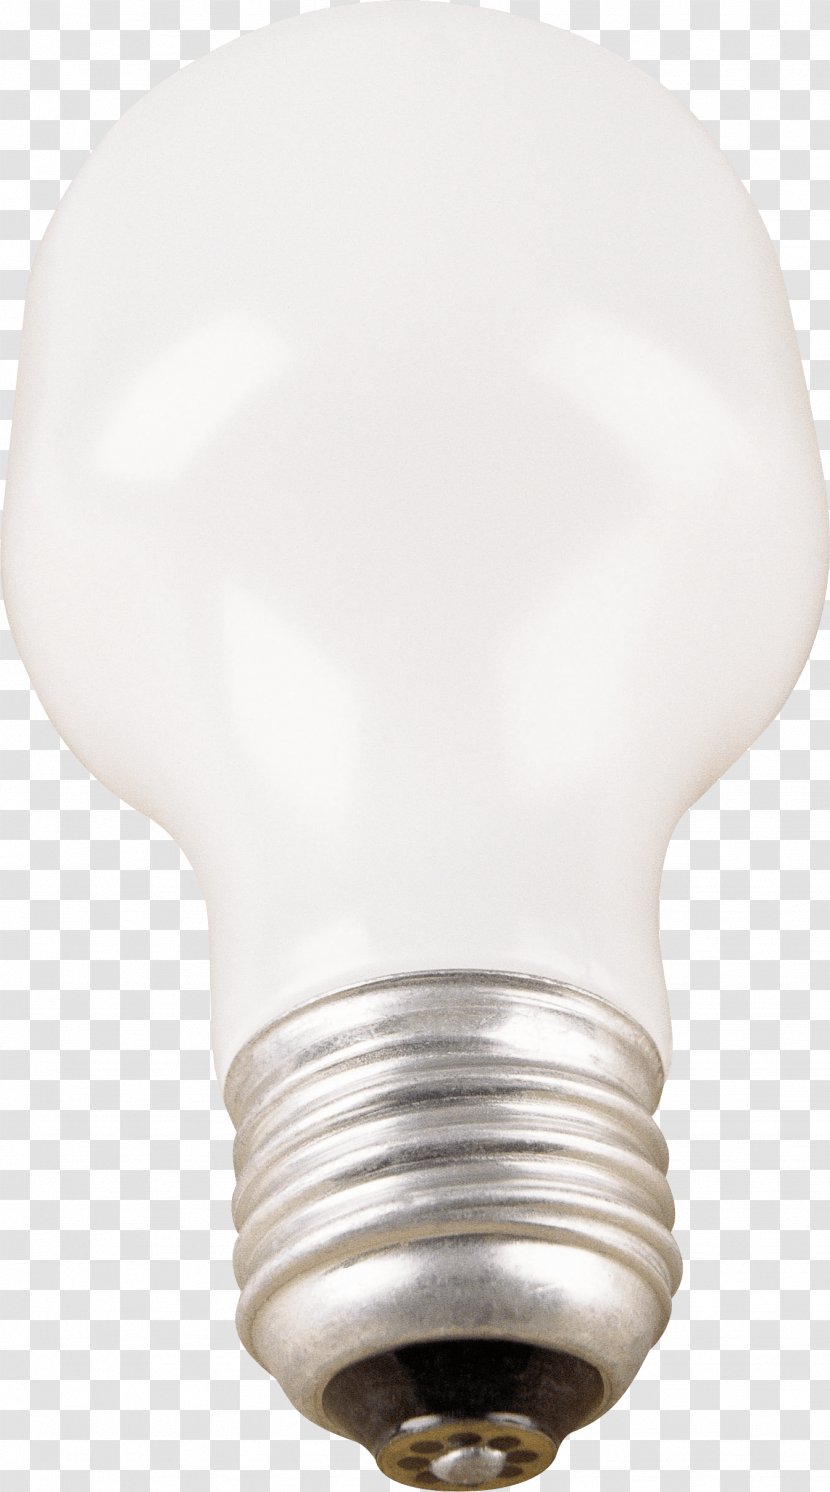 Inventions & Great Ideas Lighting - Incandescence - Lamp Image Transparent PNG